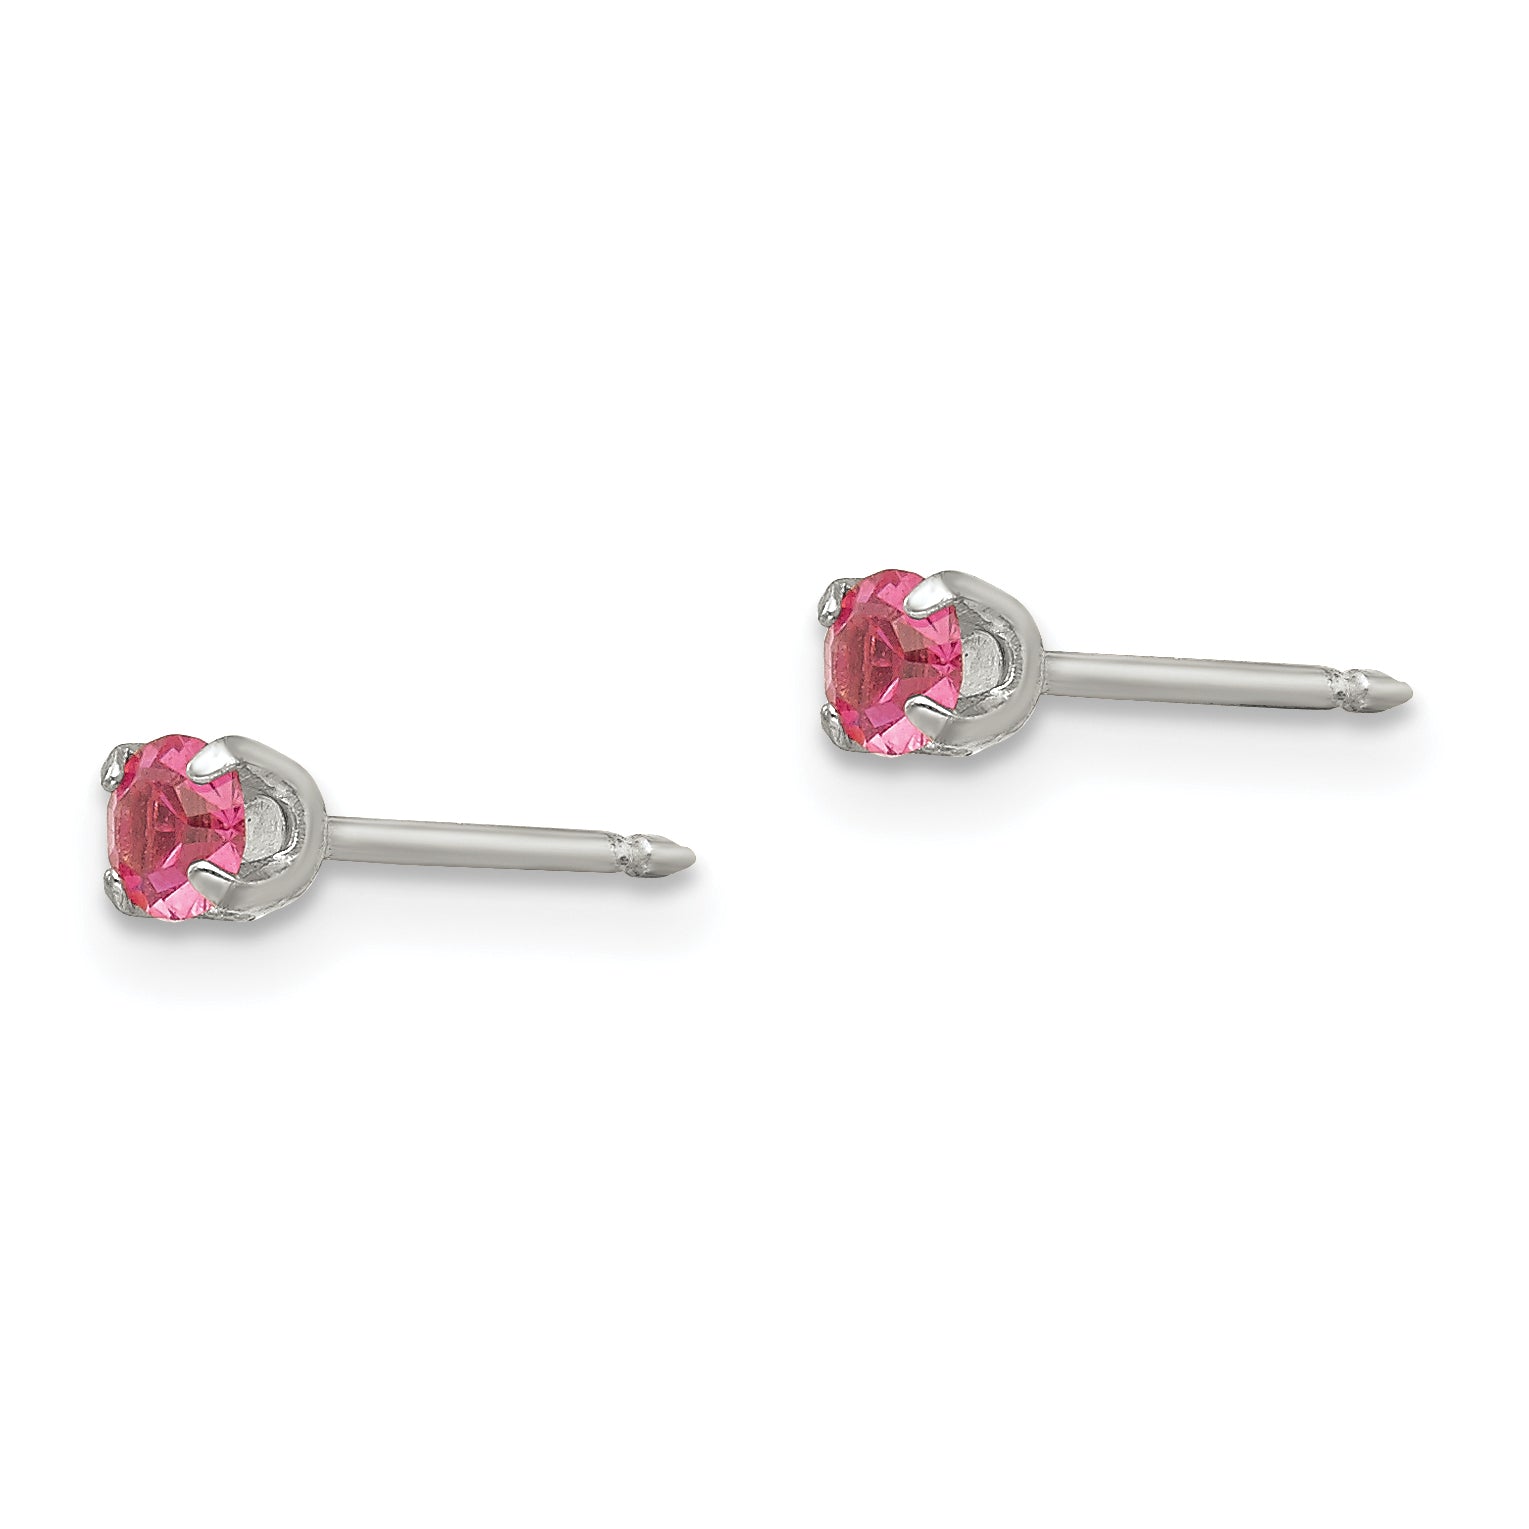 Inverness Stainless Steel 3mm Rose Crystal Earrings